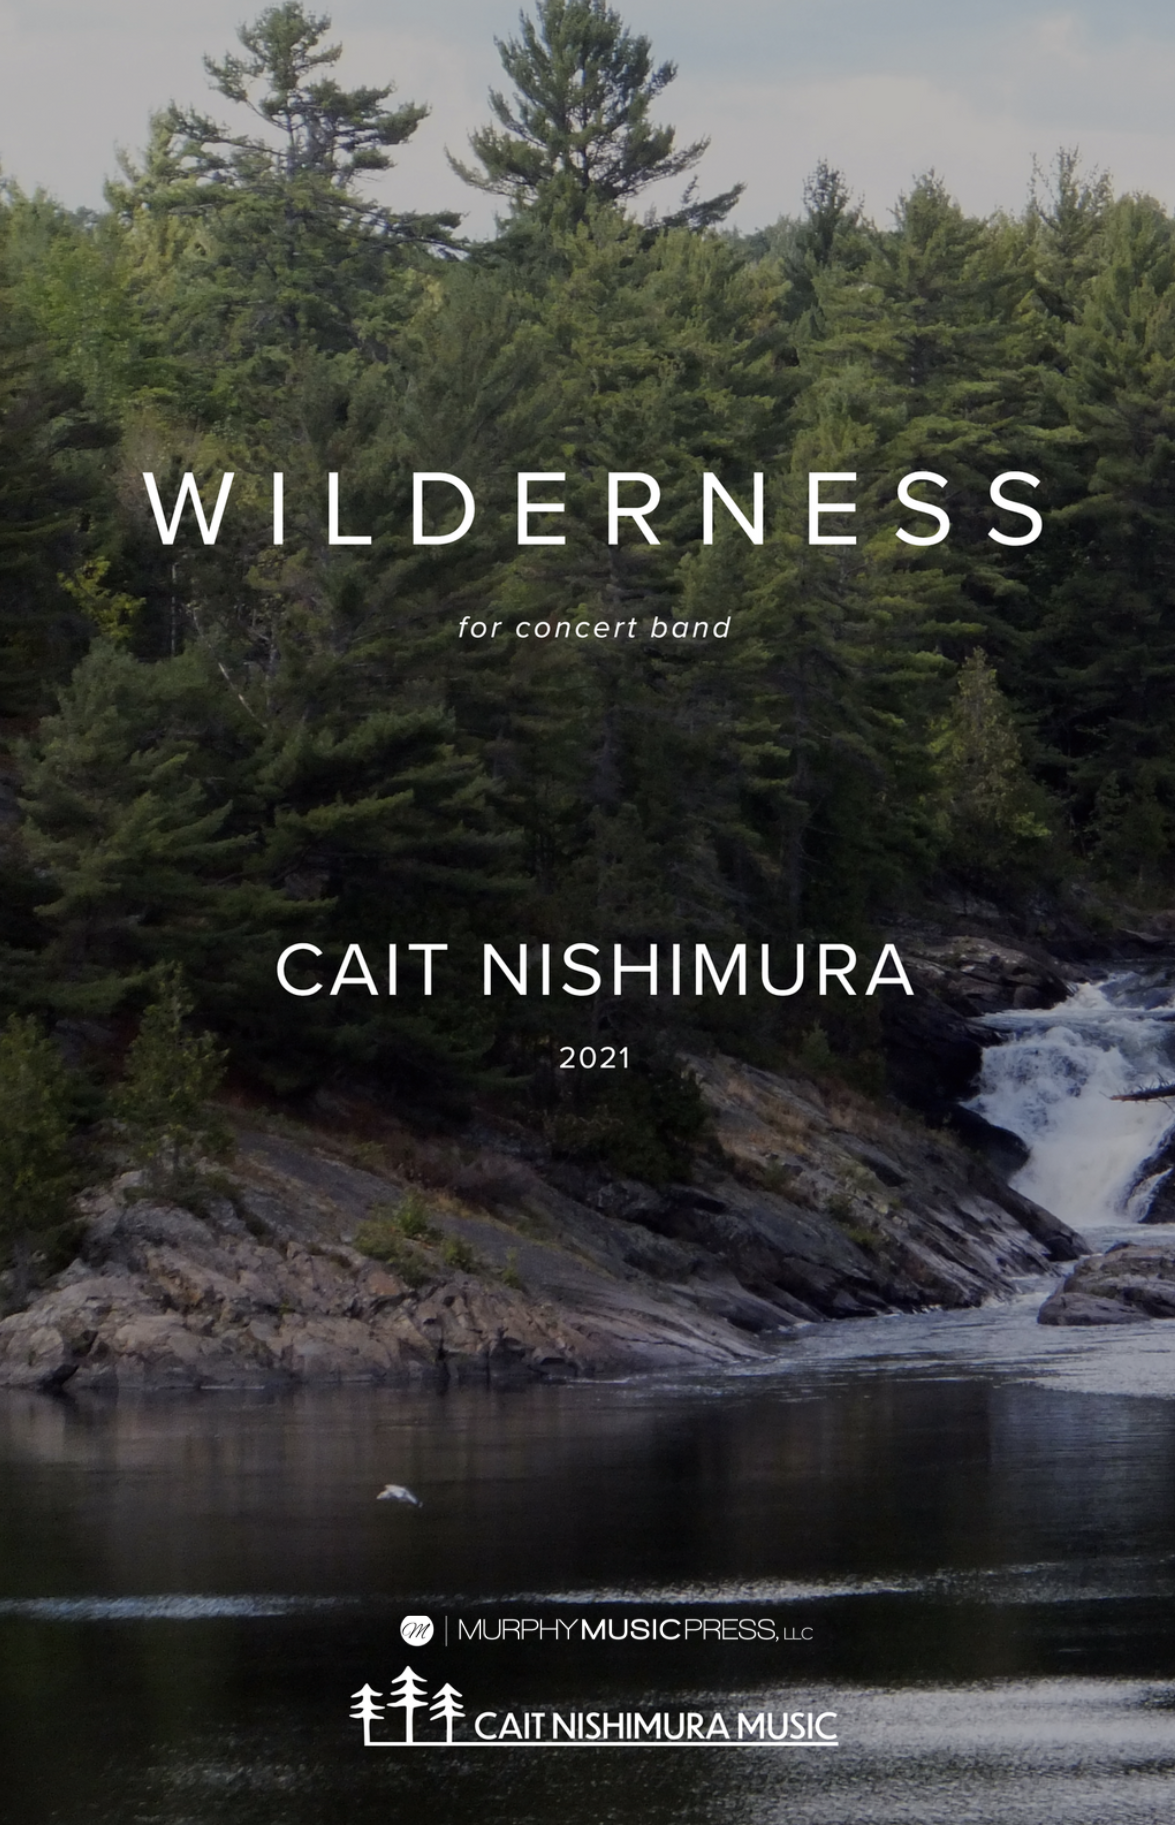 Wilderness (Score Only) by Cait Nishimura